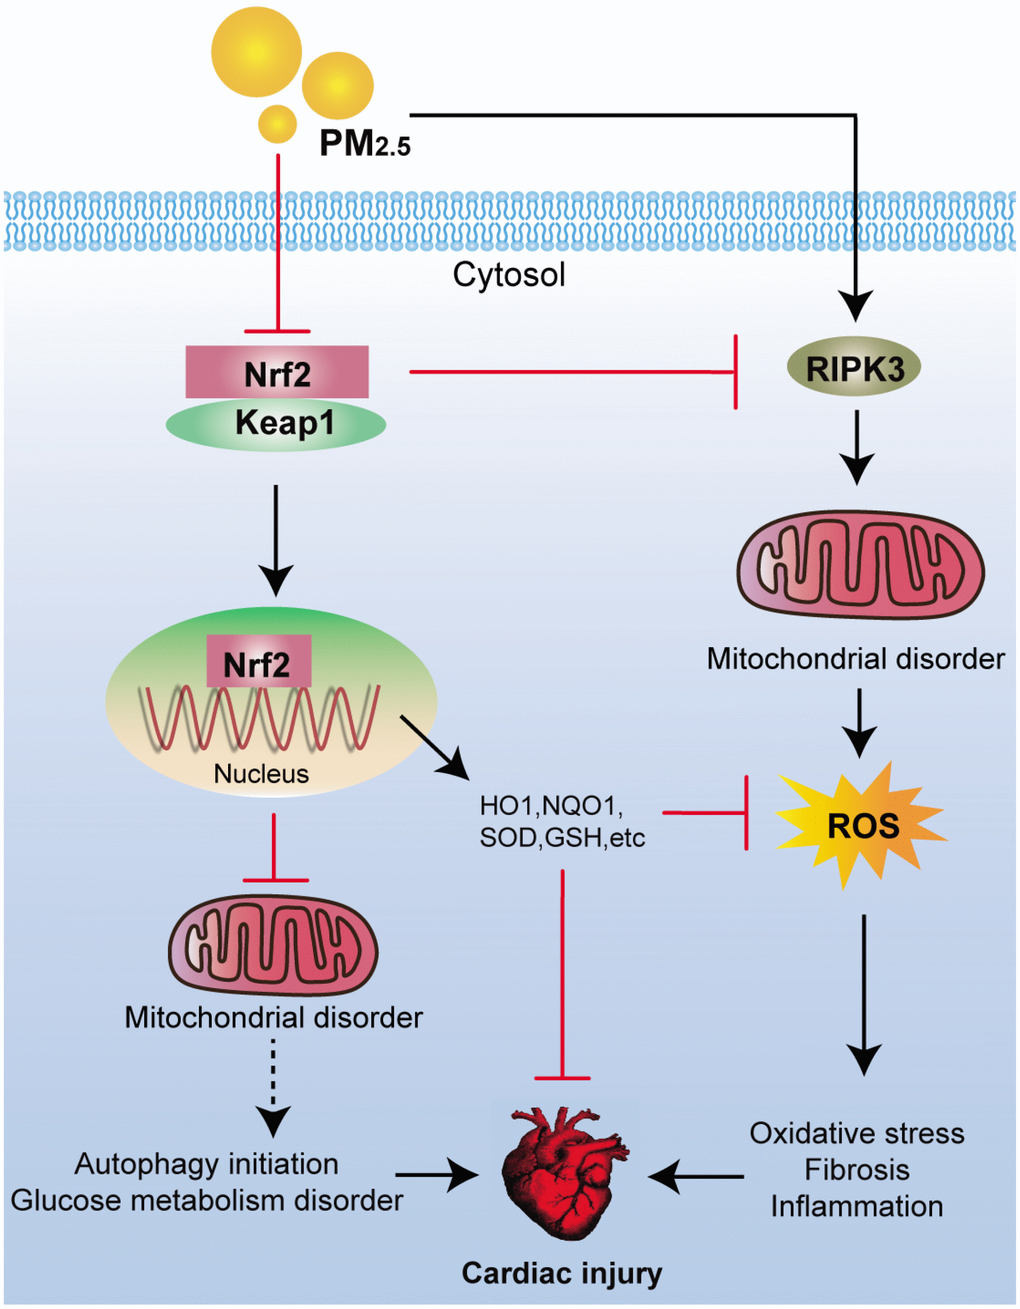 Scheme of the Nrf2-mediated cardiac injury induced by PM2.5. Long-term exposure of PM2.5 to mice resulted in oxidative stress, fibrosis and inflammation via RIPK3-regulated mitochondrial disorder. In addition, autophagy initiation and dysfunction of glucose metabolism were observed in hearts of PM2.5-challenged mice. All these effects induced by PM2.5 were significantly accelerated by the loss of Nrf2, contributing to the progression of cardiomyopathy eventually.